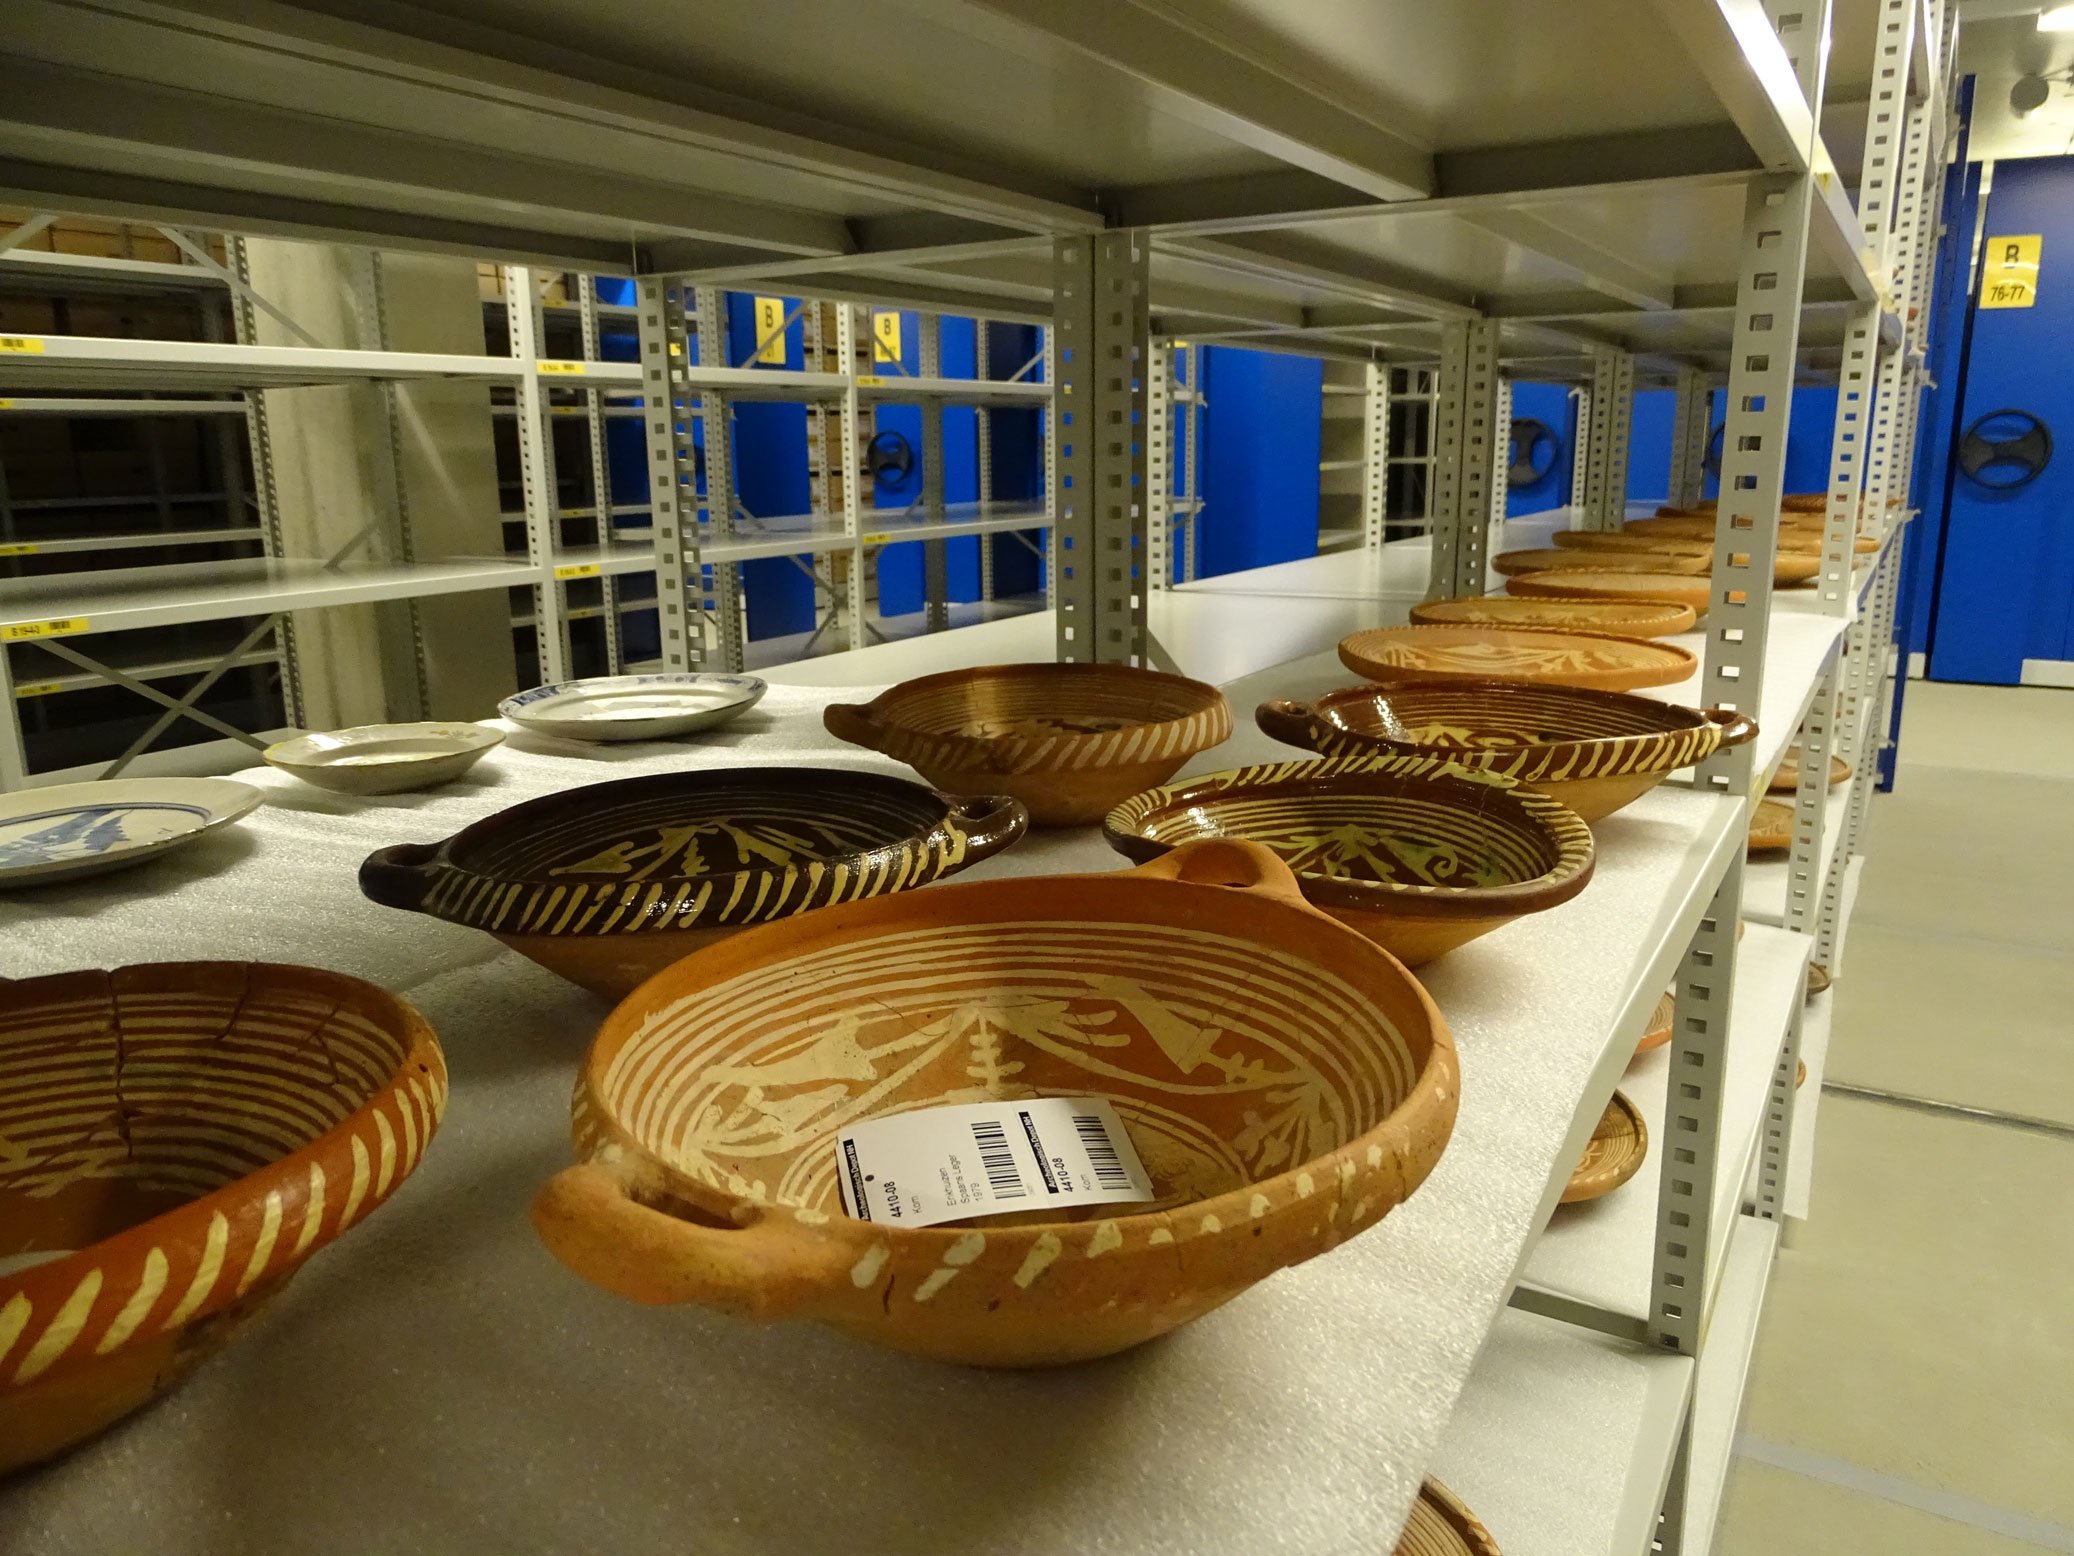 Ceramic vessels on a shelf in an archaeological store.